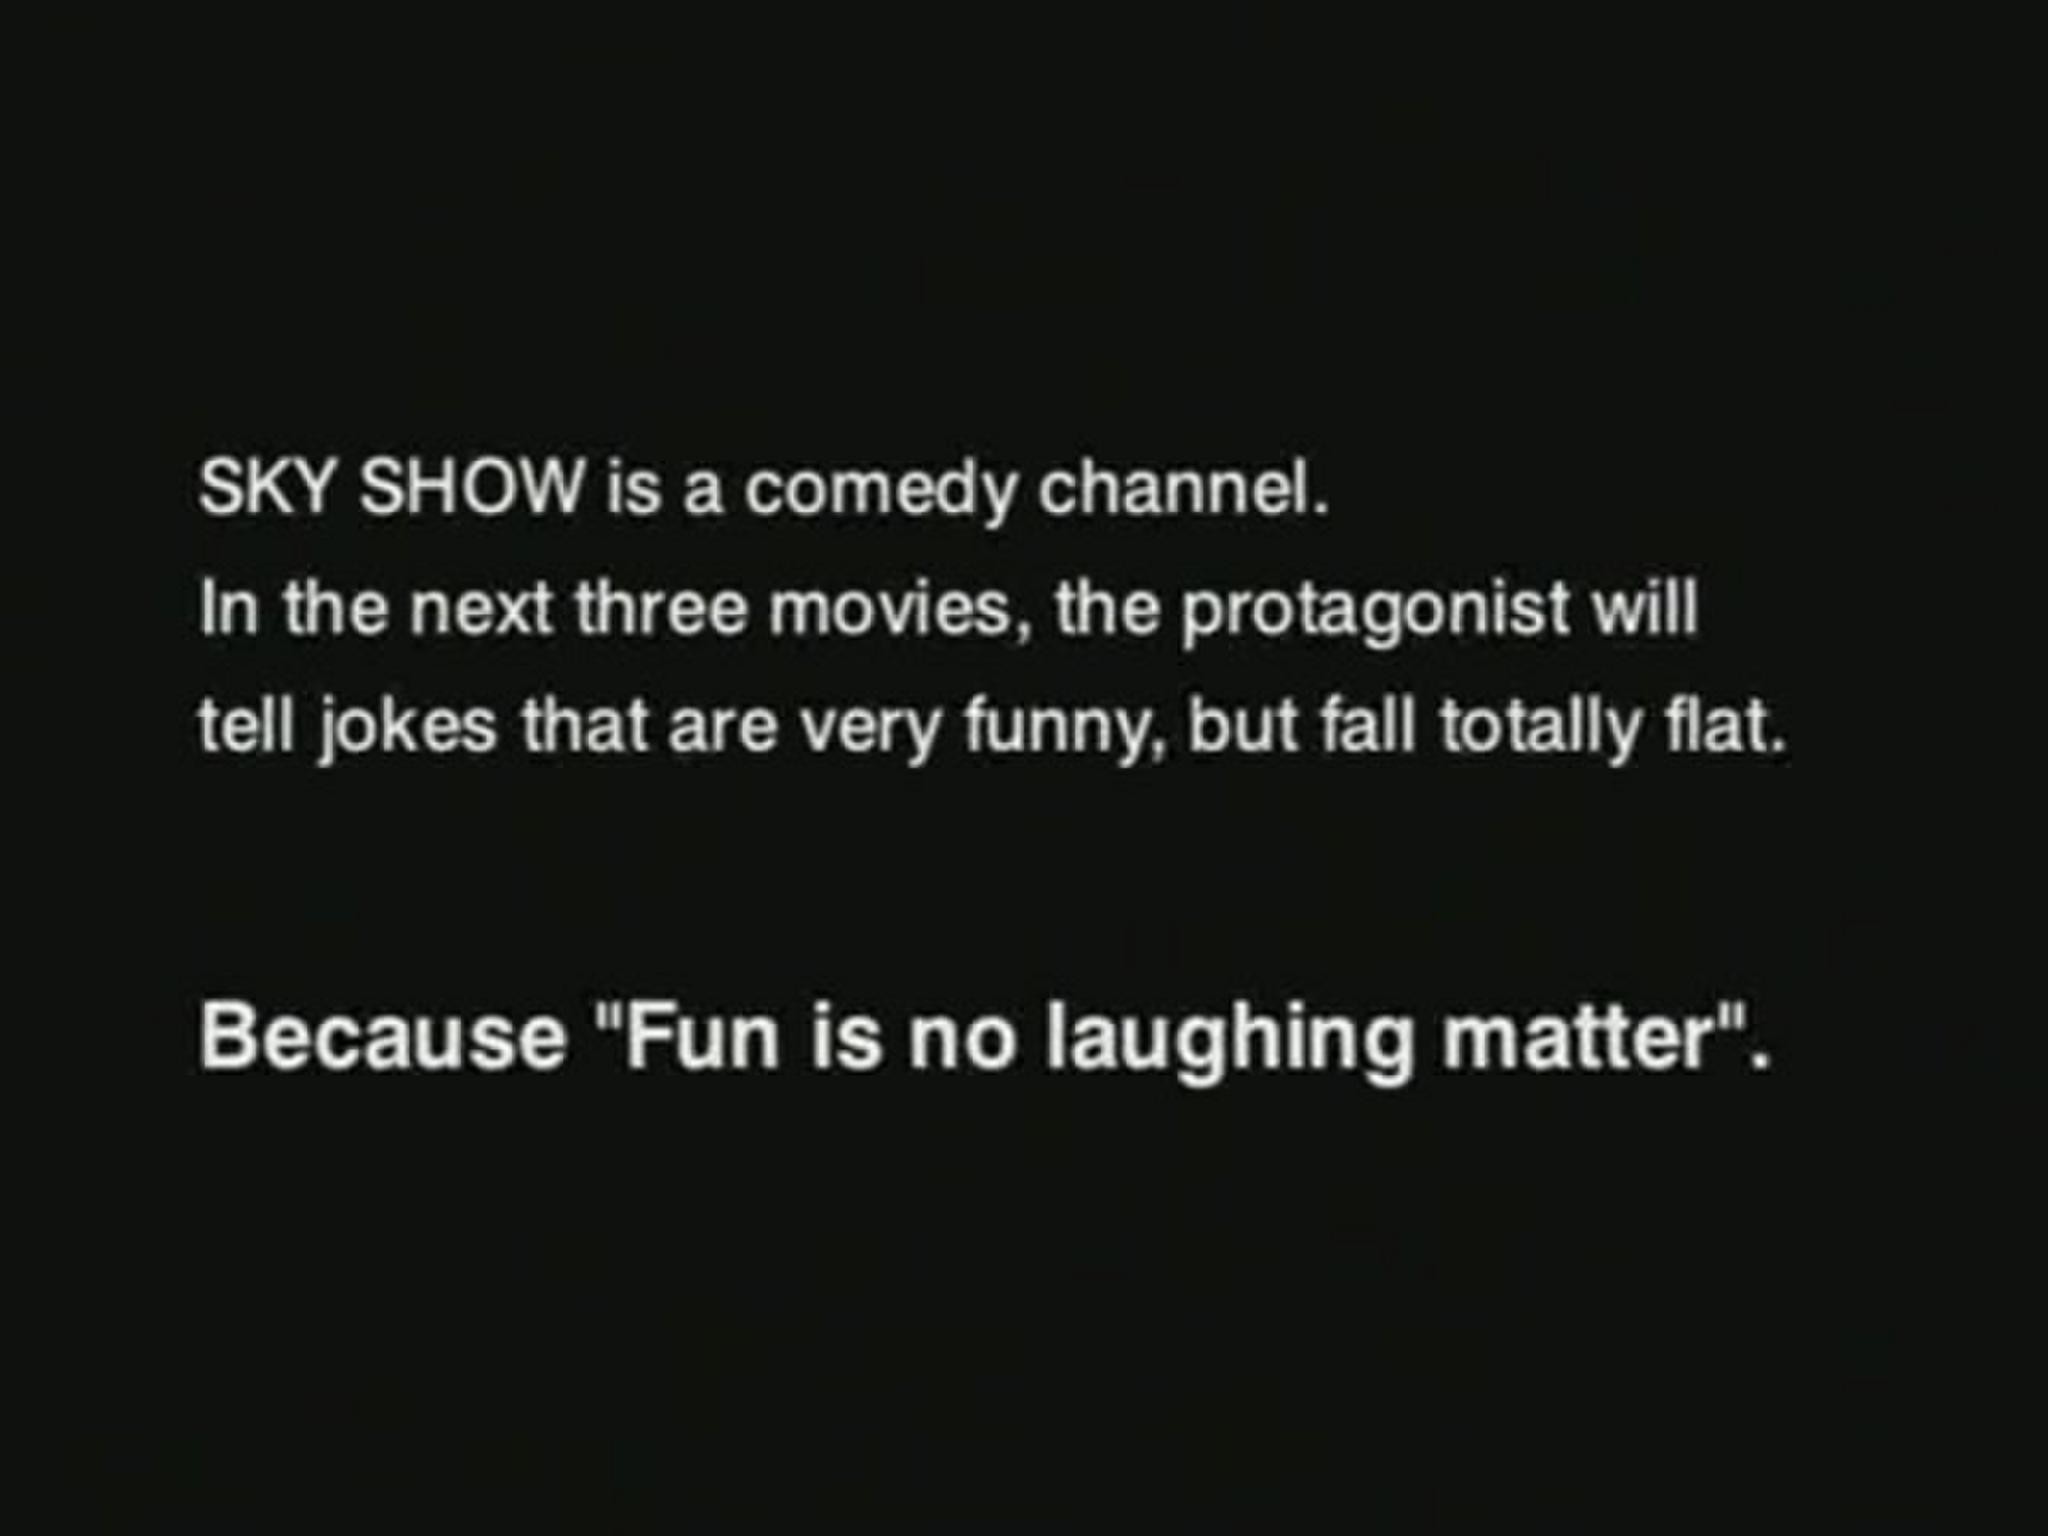 SKY SHOW COMEDY CHANNEL